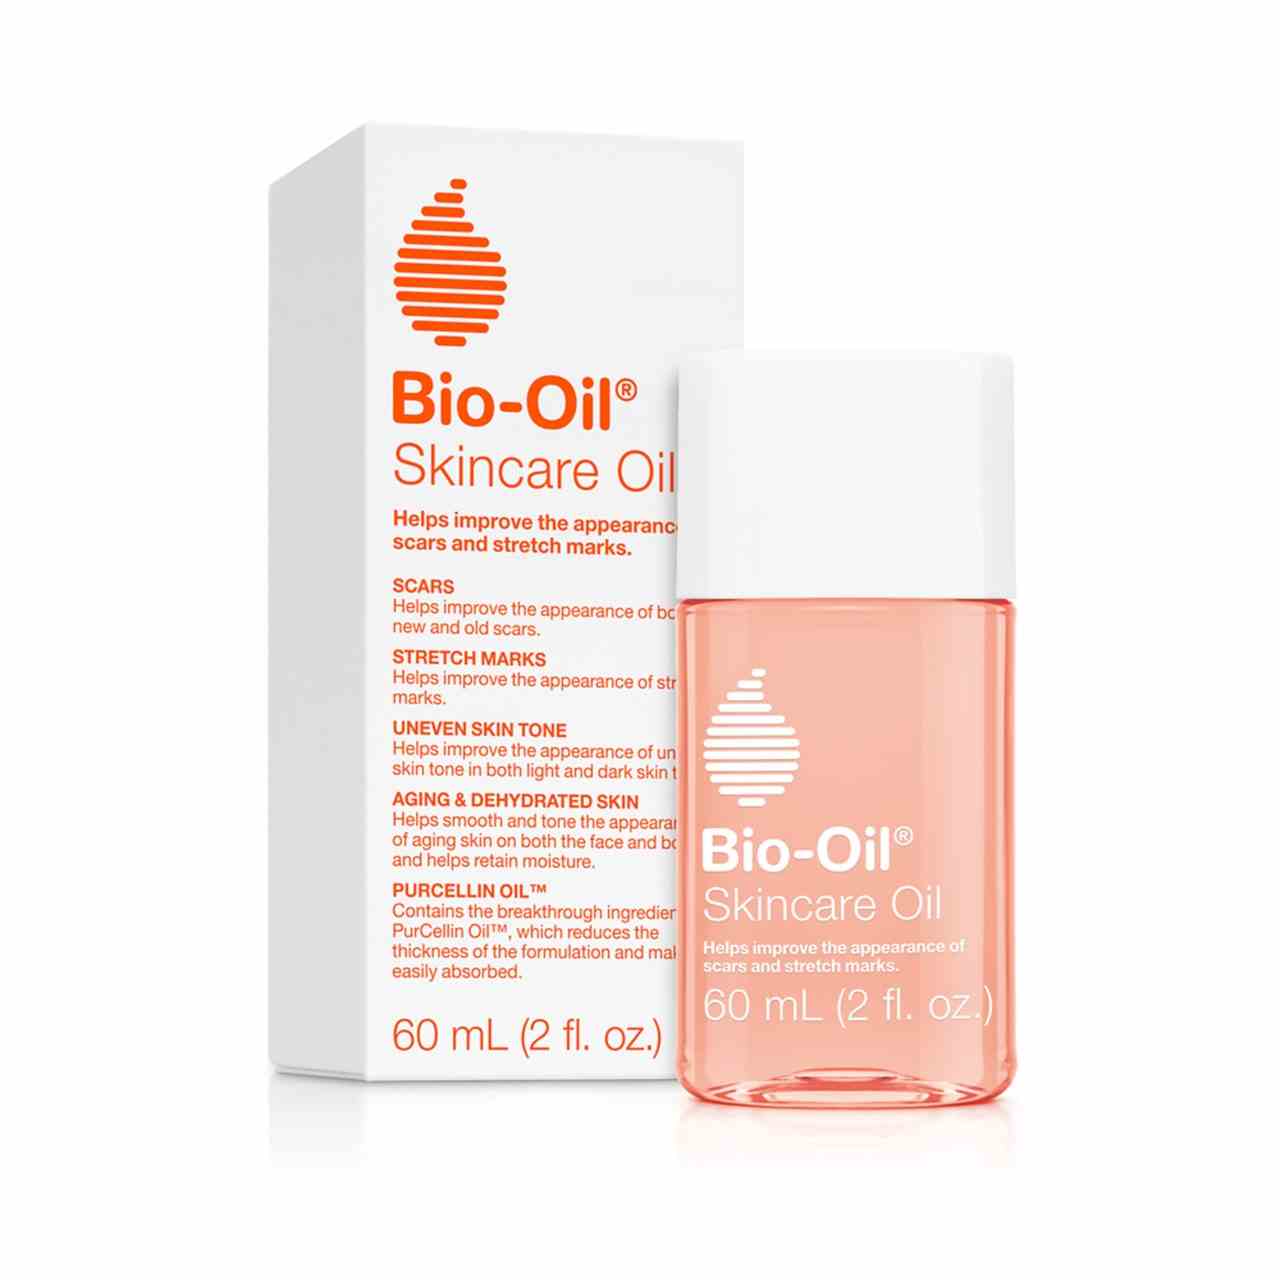 A clear peach-colroed bottle with white cap and text that says "Bio-Oil Skincare Oil" with matching packaging box on a white background.